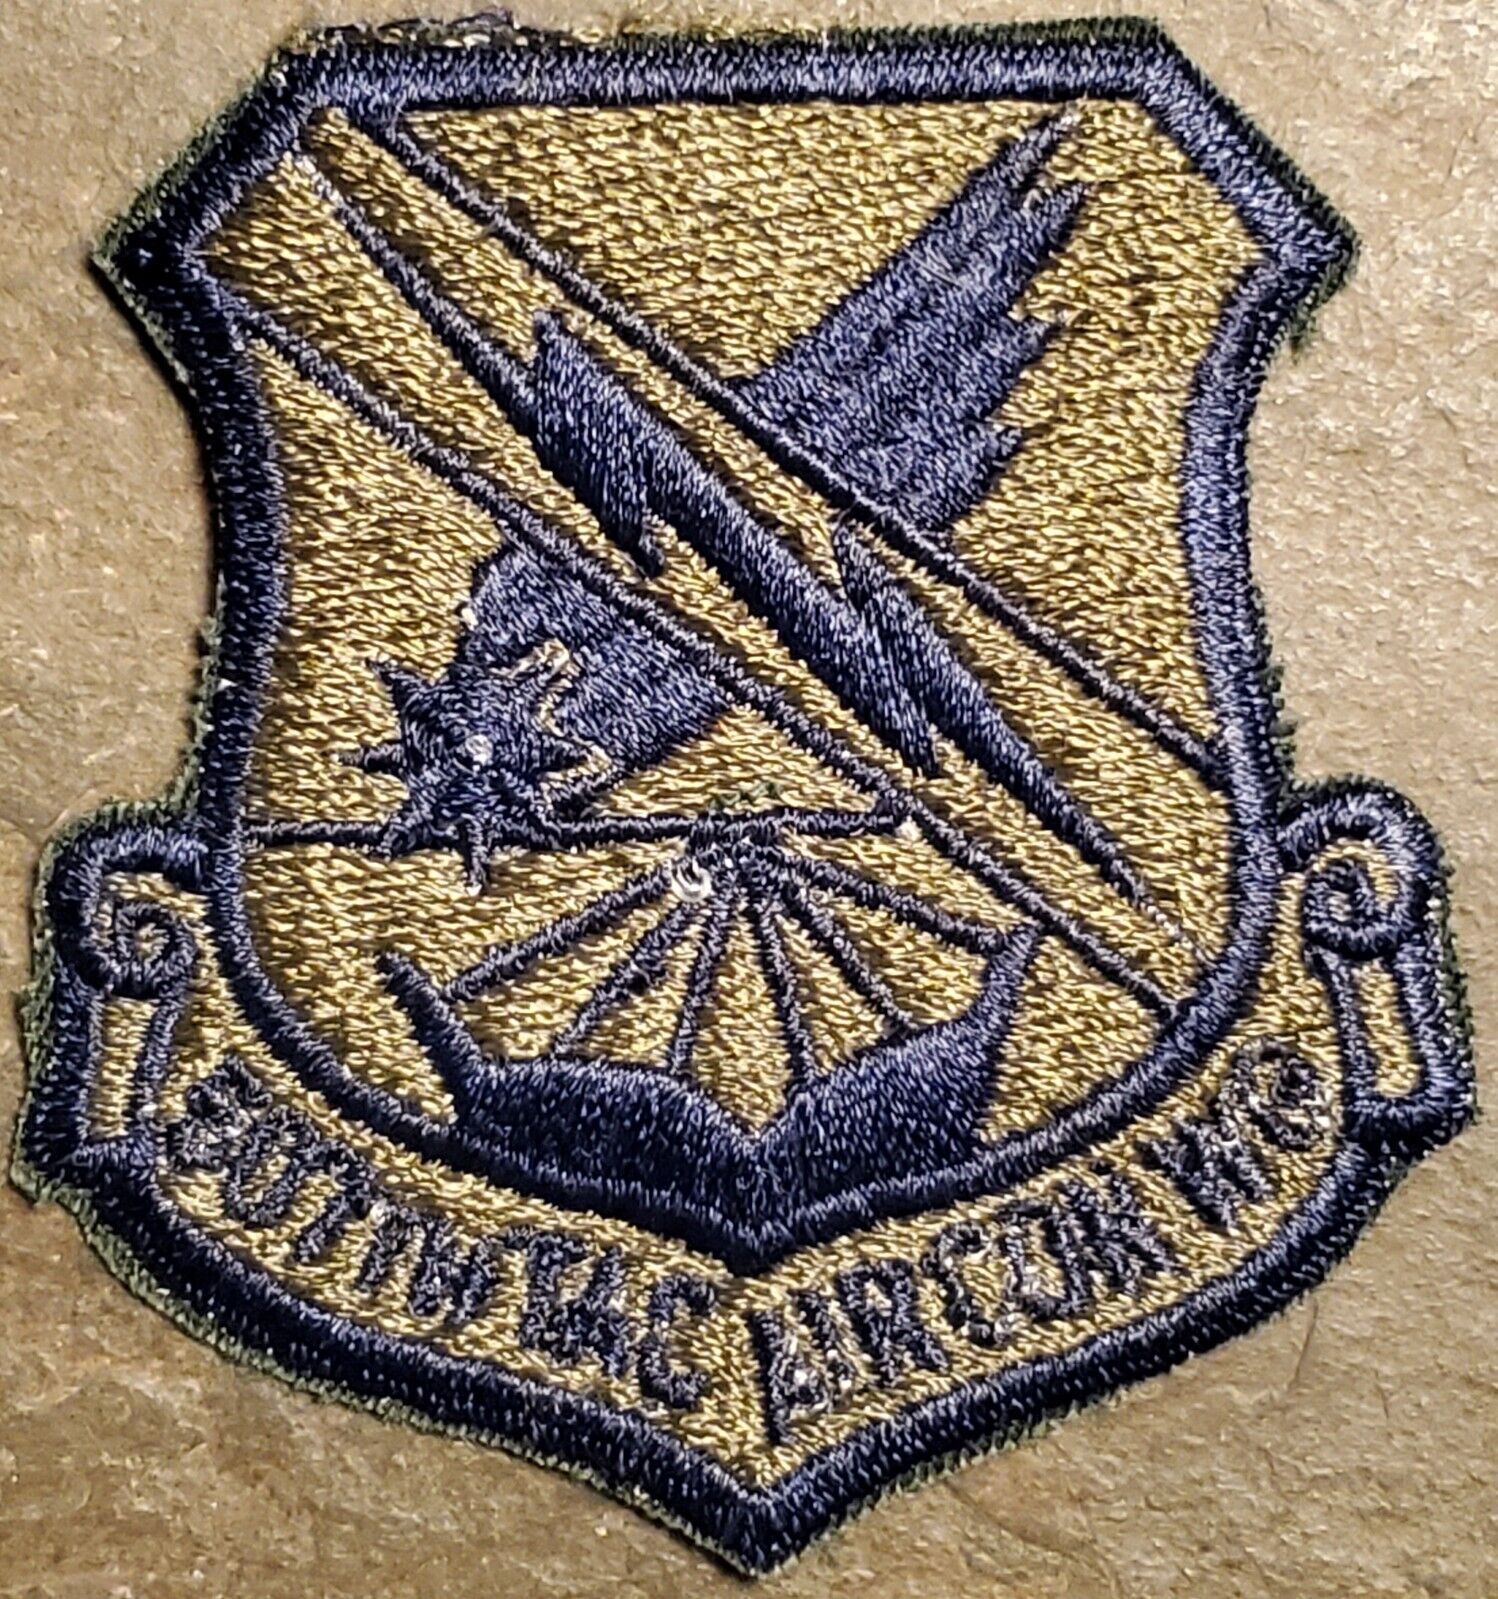 USAF 507th Tactical Air Control Wing SUBDUED Patch VINTAGE ORIGINAL MILITARY 